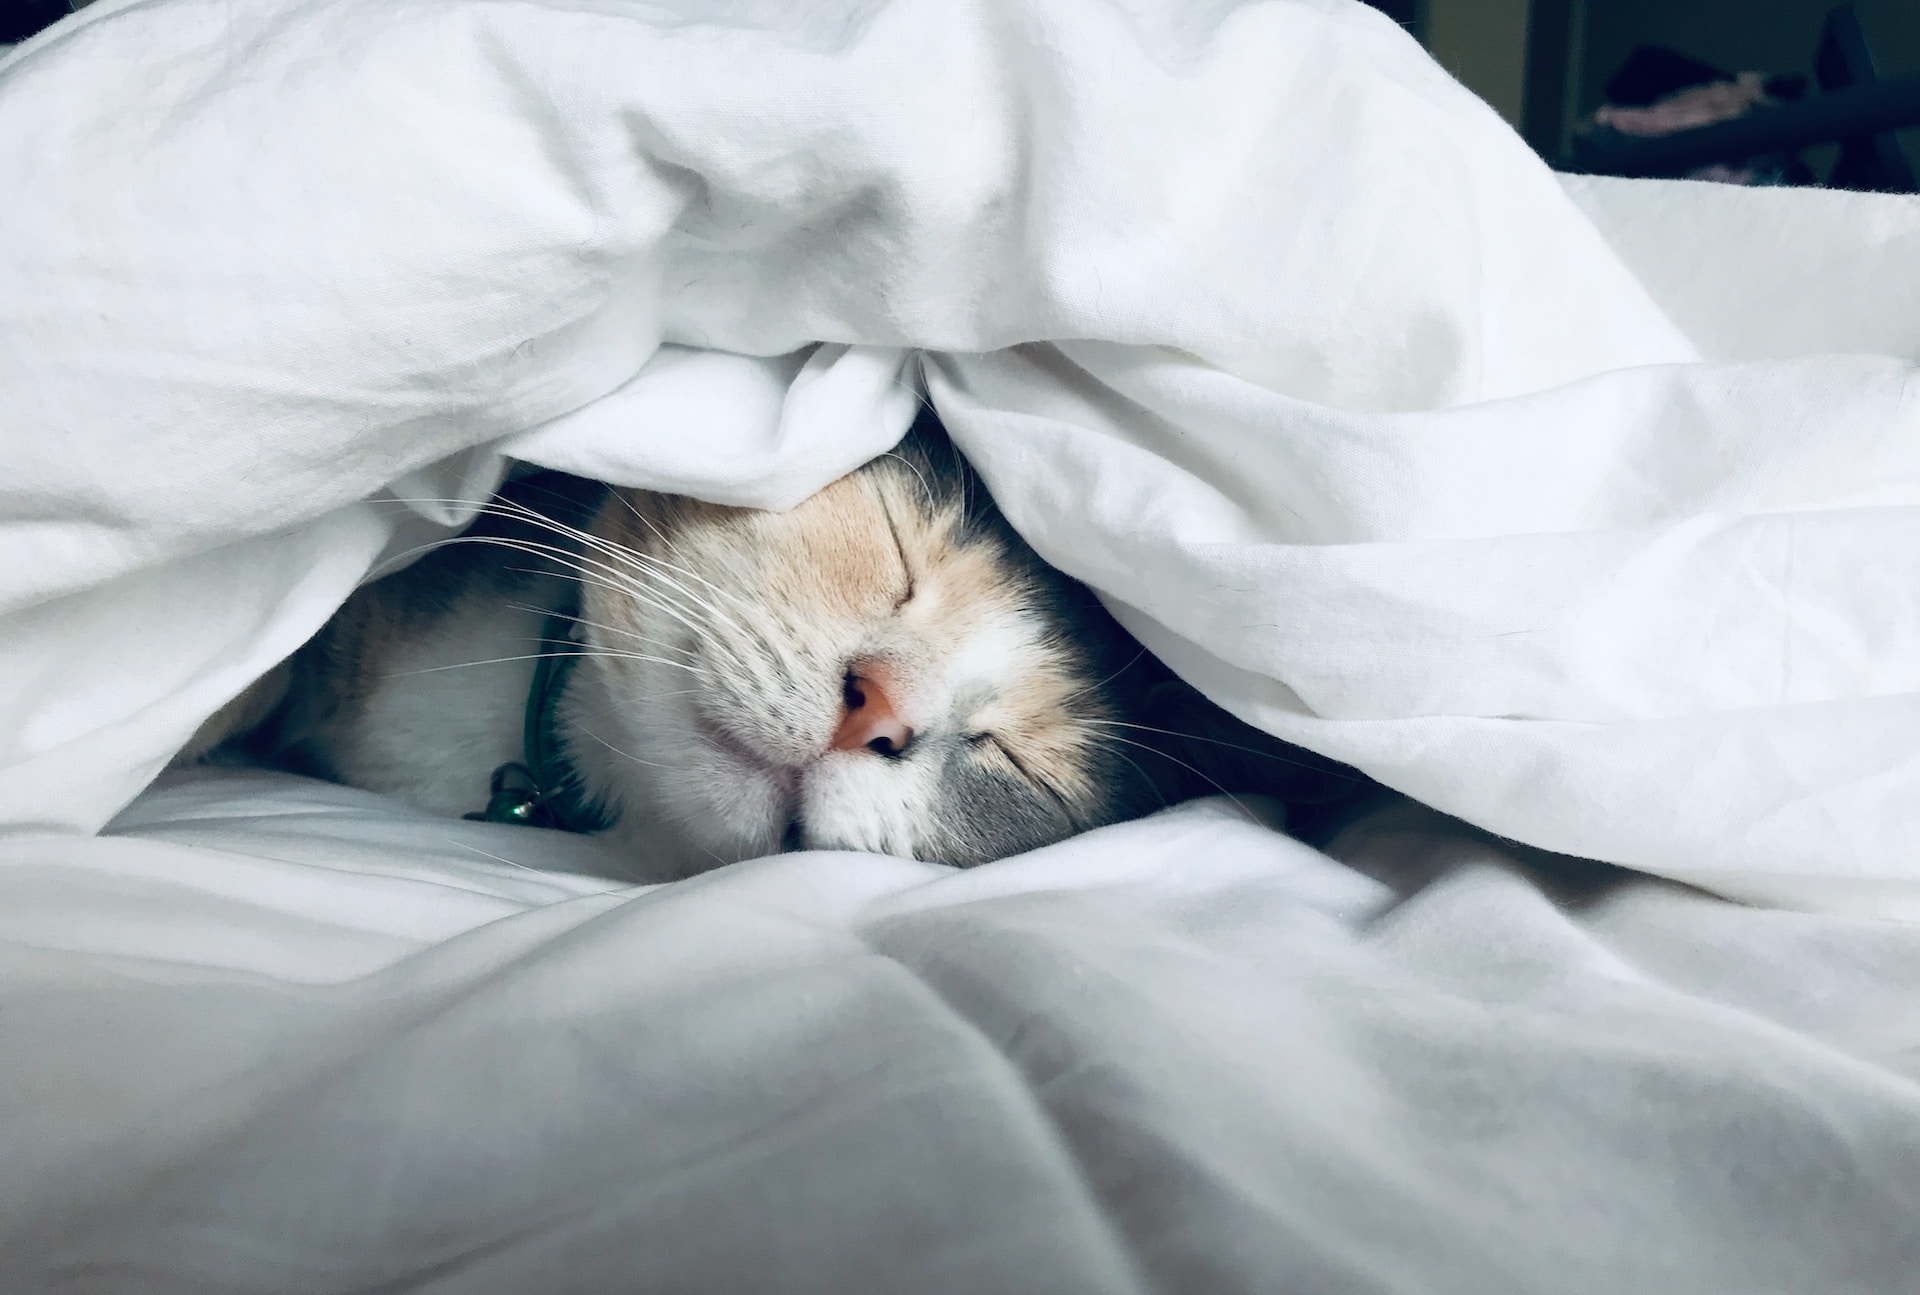 A cat sleeping under covers